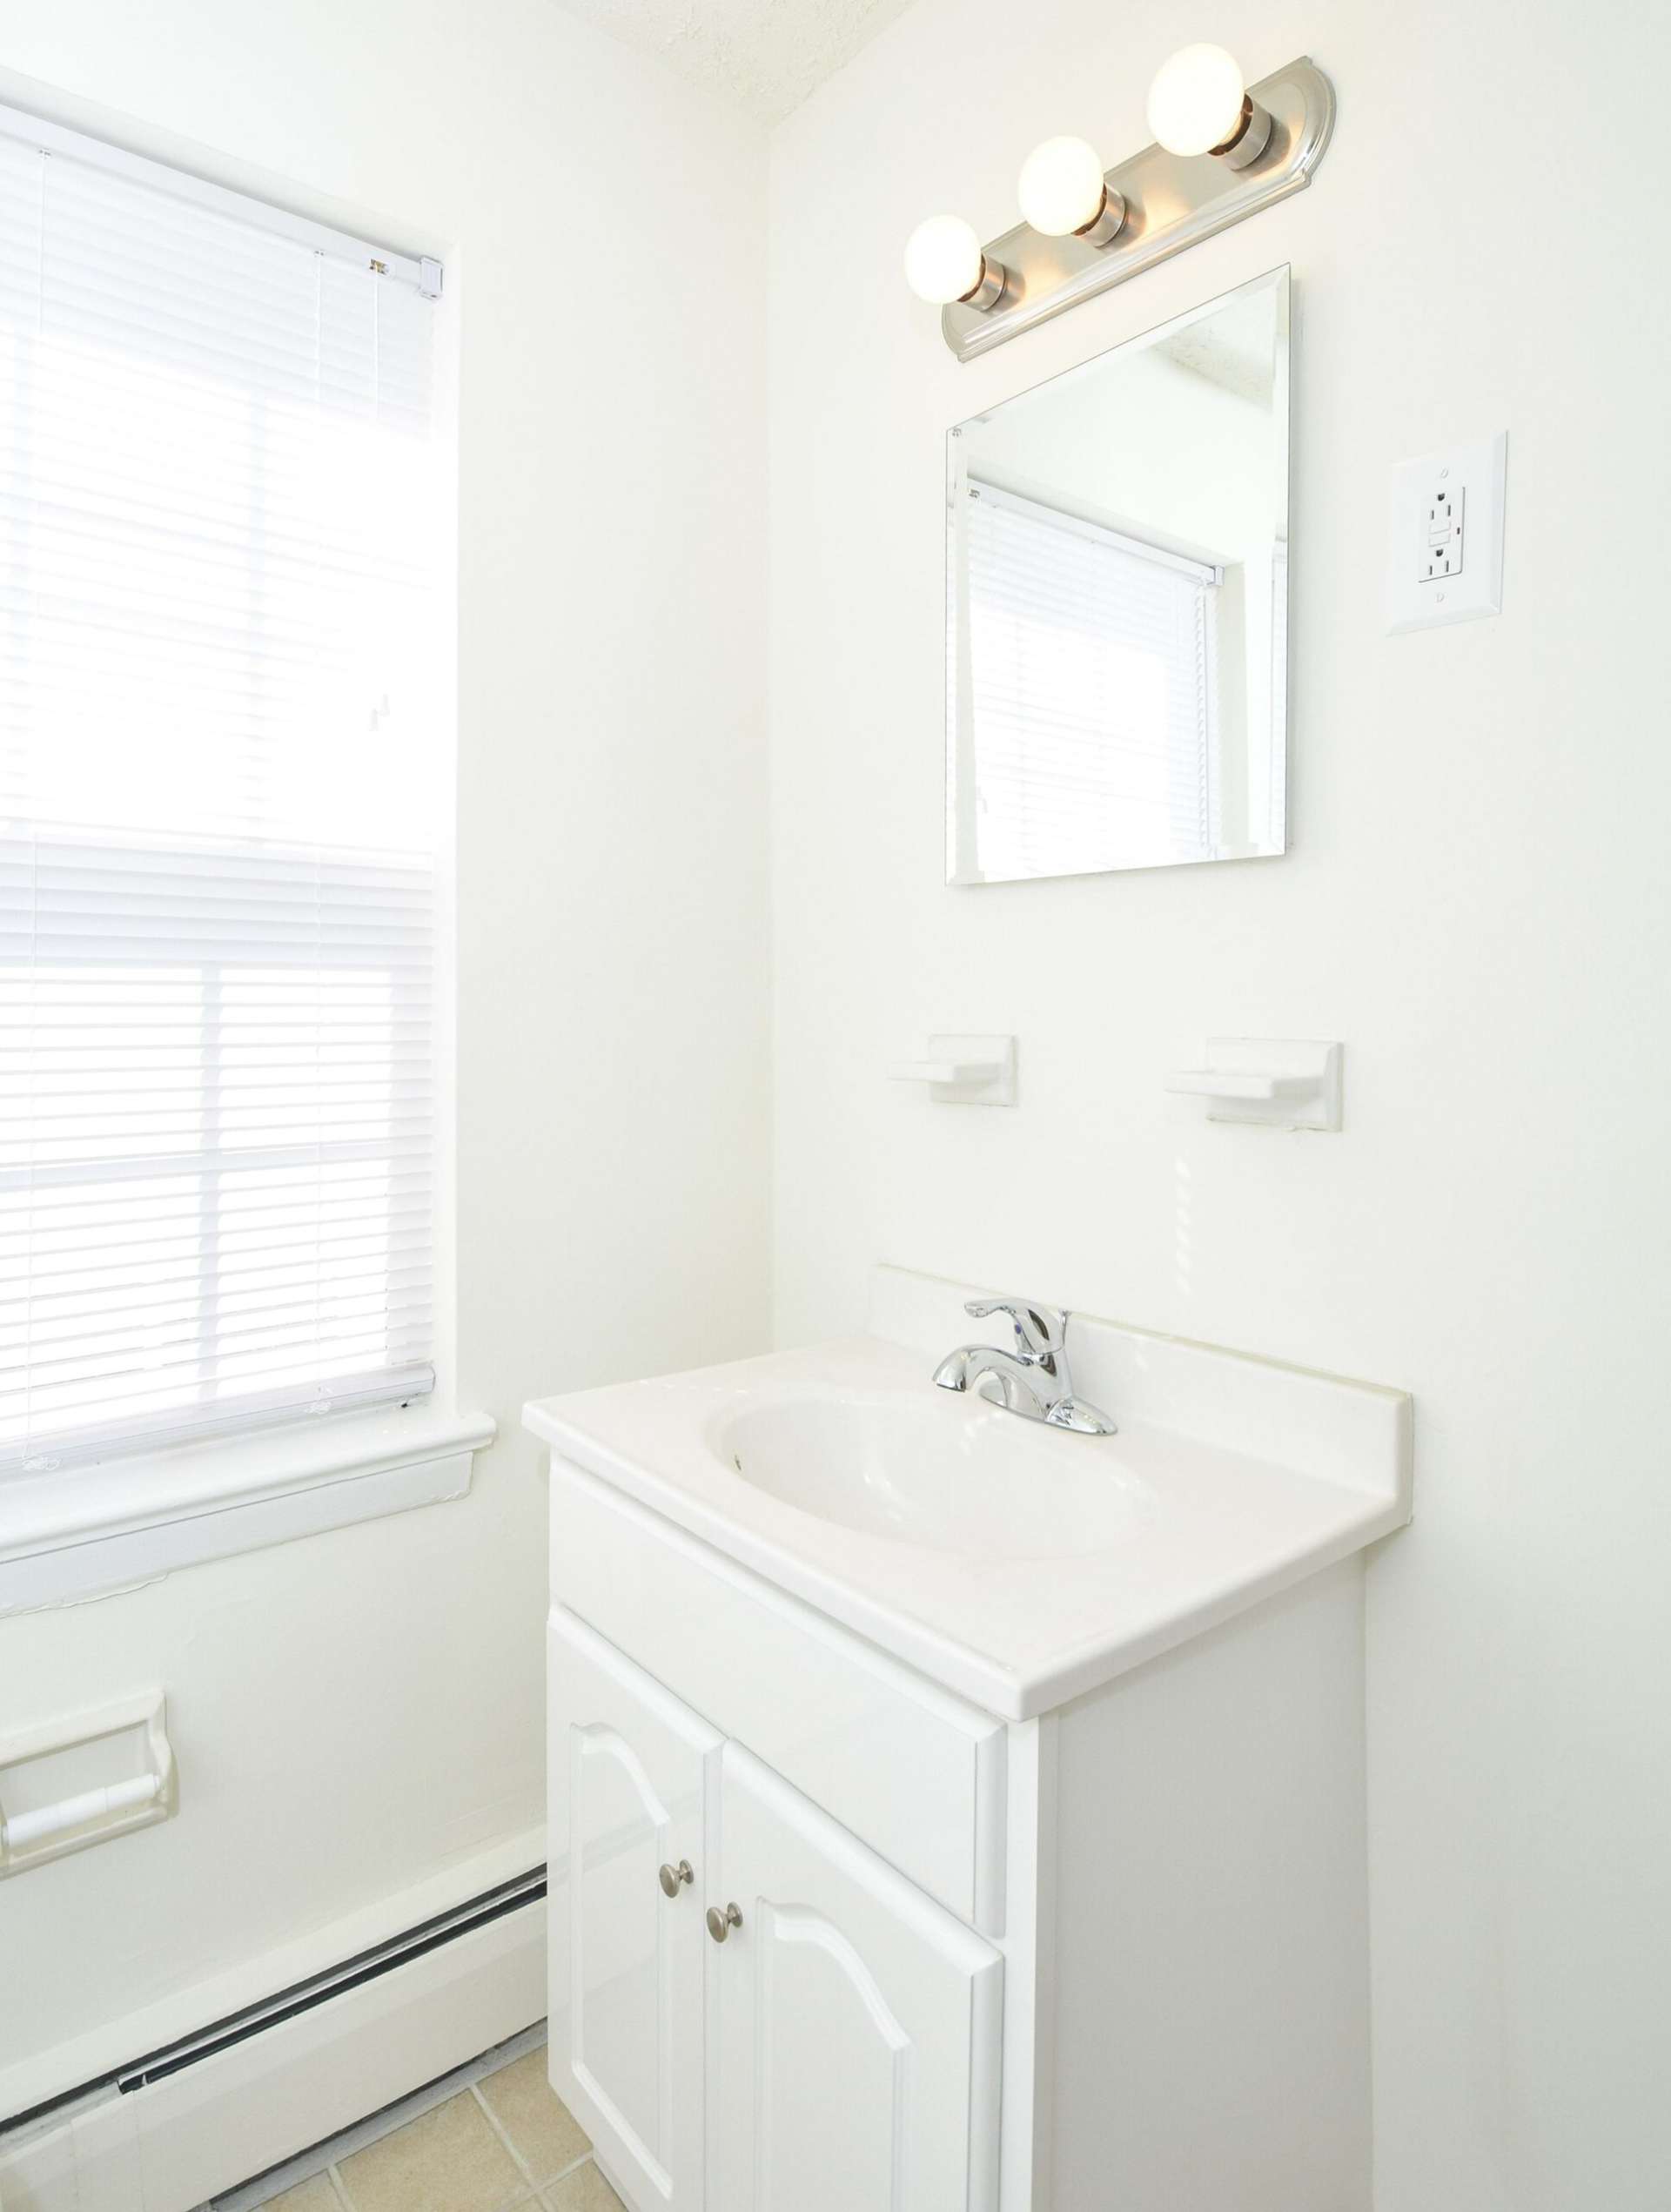 Bathroom with a sink, small mirror, and a large window.